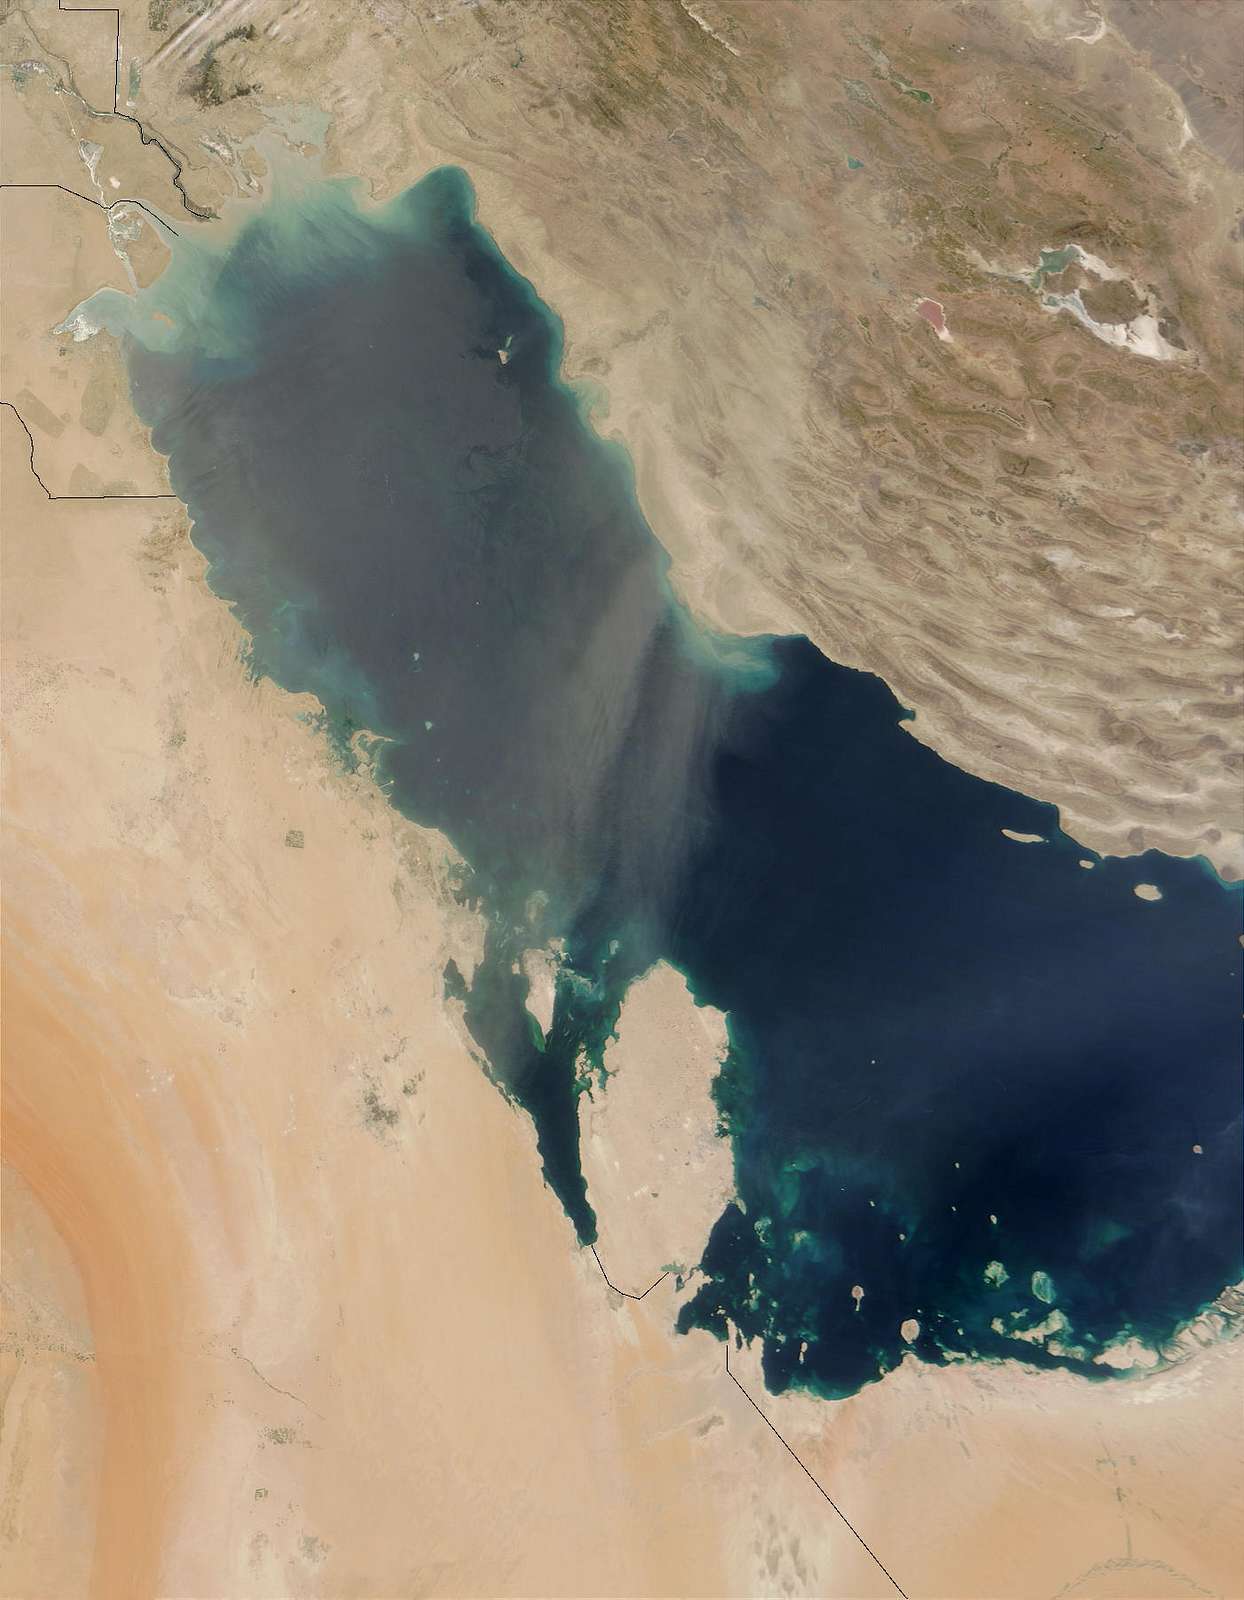 Dust Storm Over Persian Gulf Natural Hazards Nara And Dvids Public